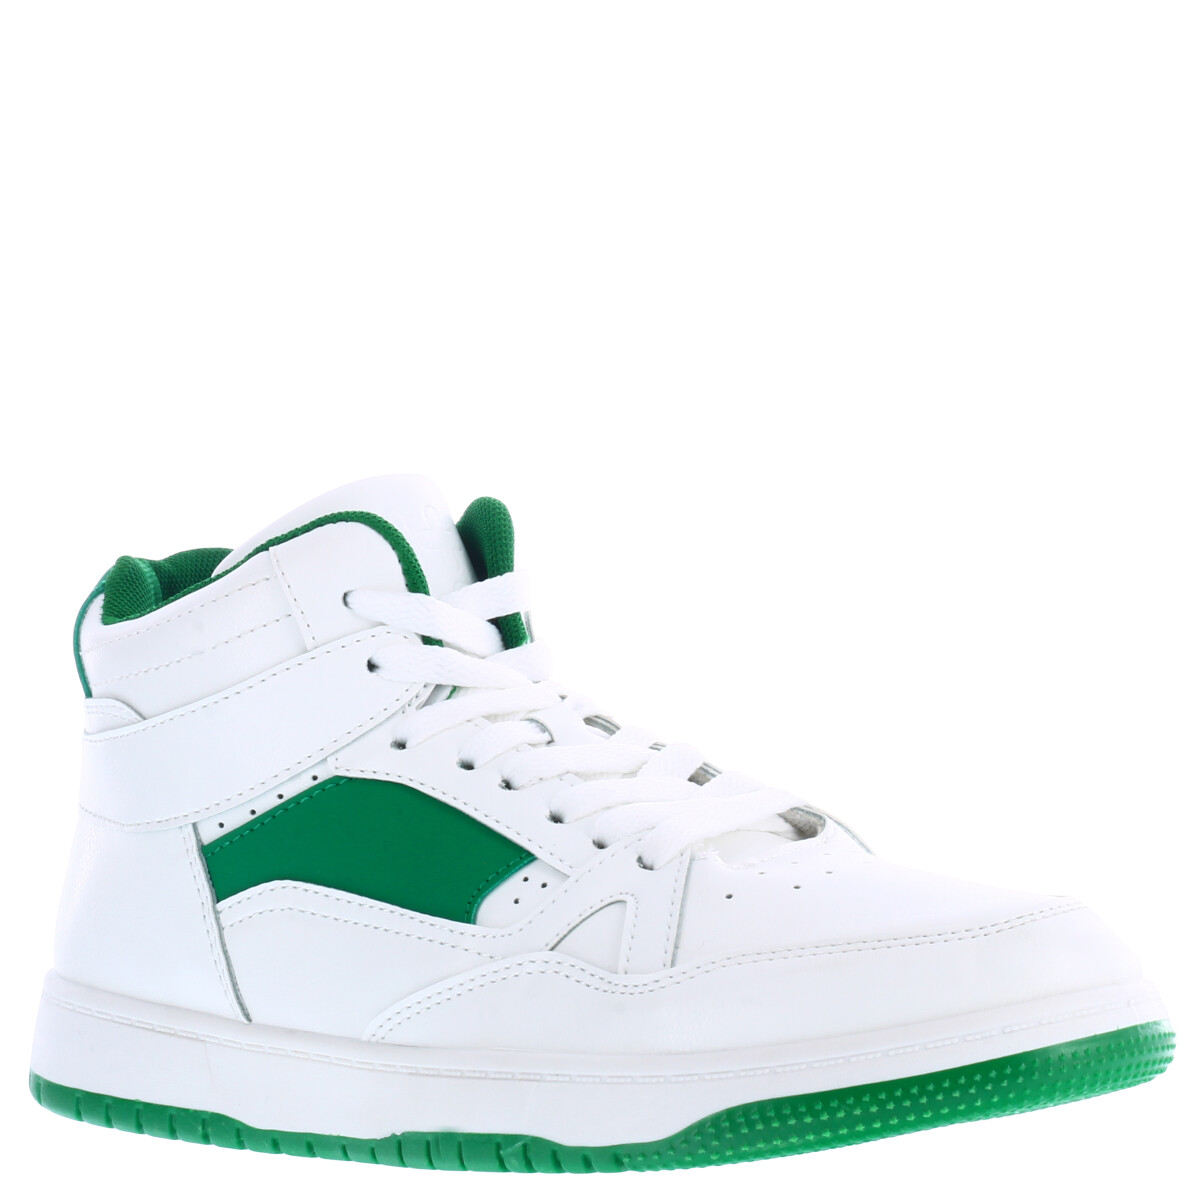 Deportivo ROCKY bicolor North Sails N+ - White/Green 